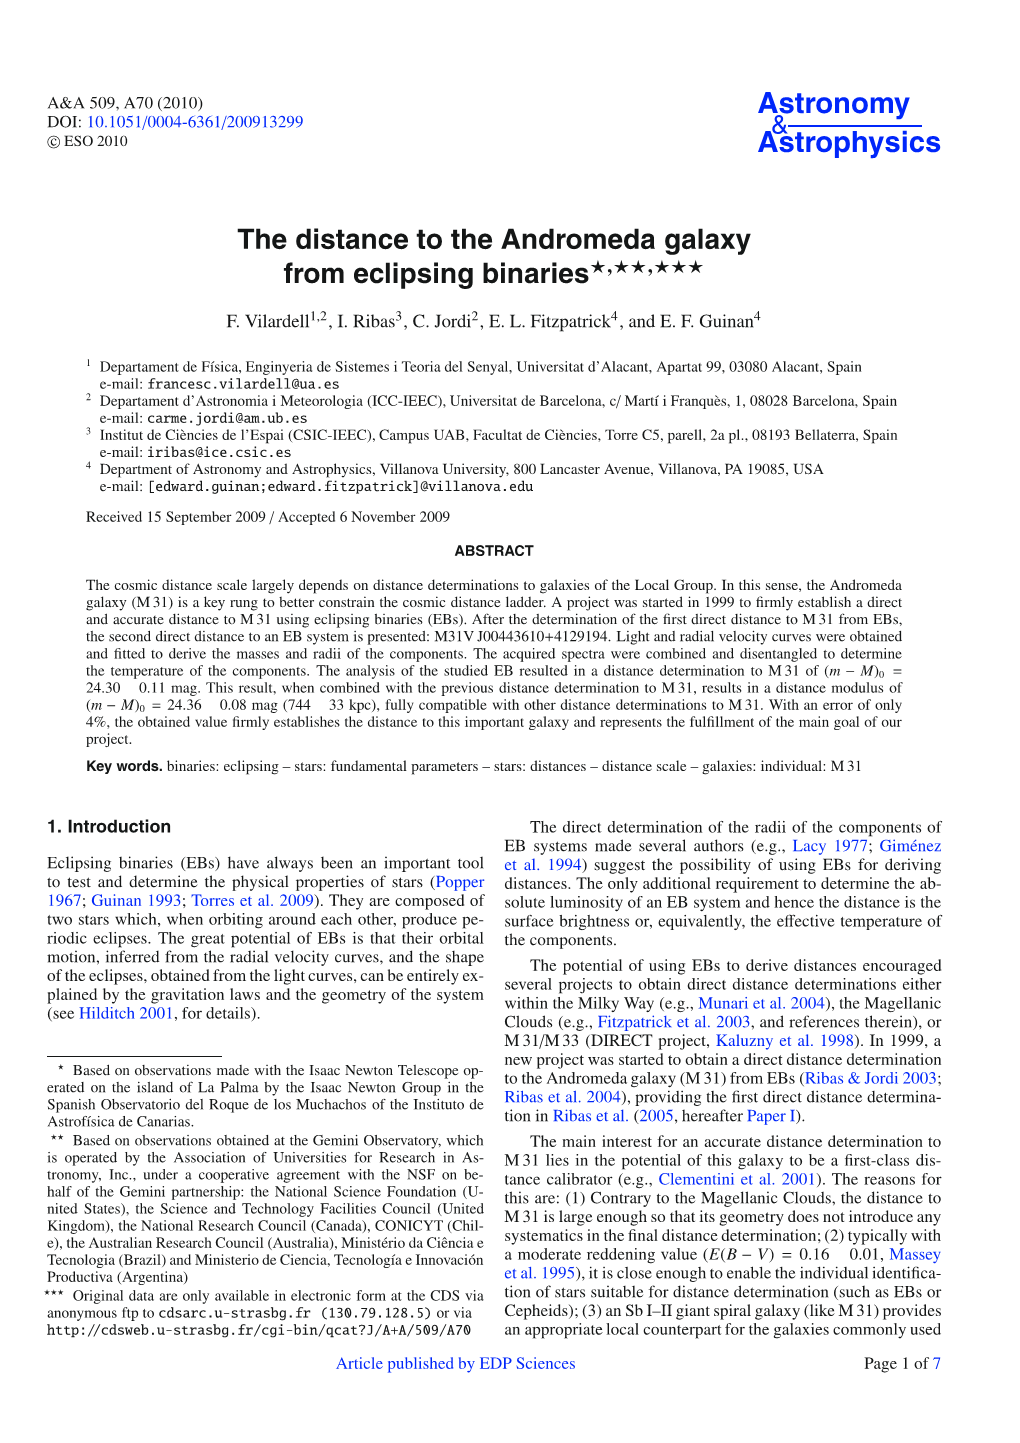 The Distance to the Andromeda Galaxy from Eclipsing Binaries�,��,�